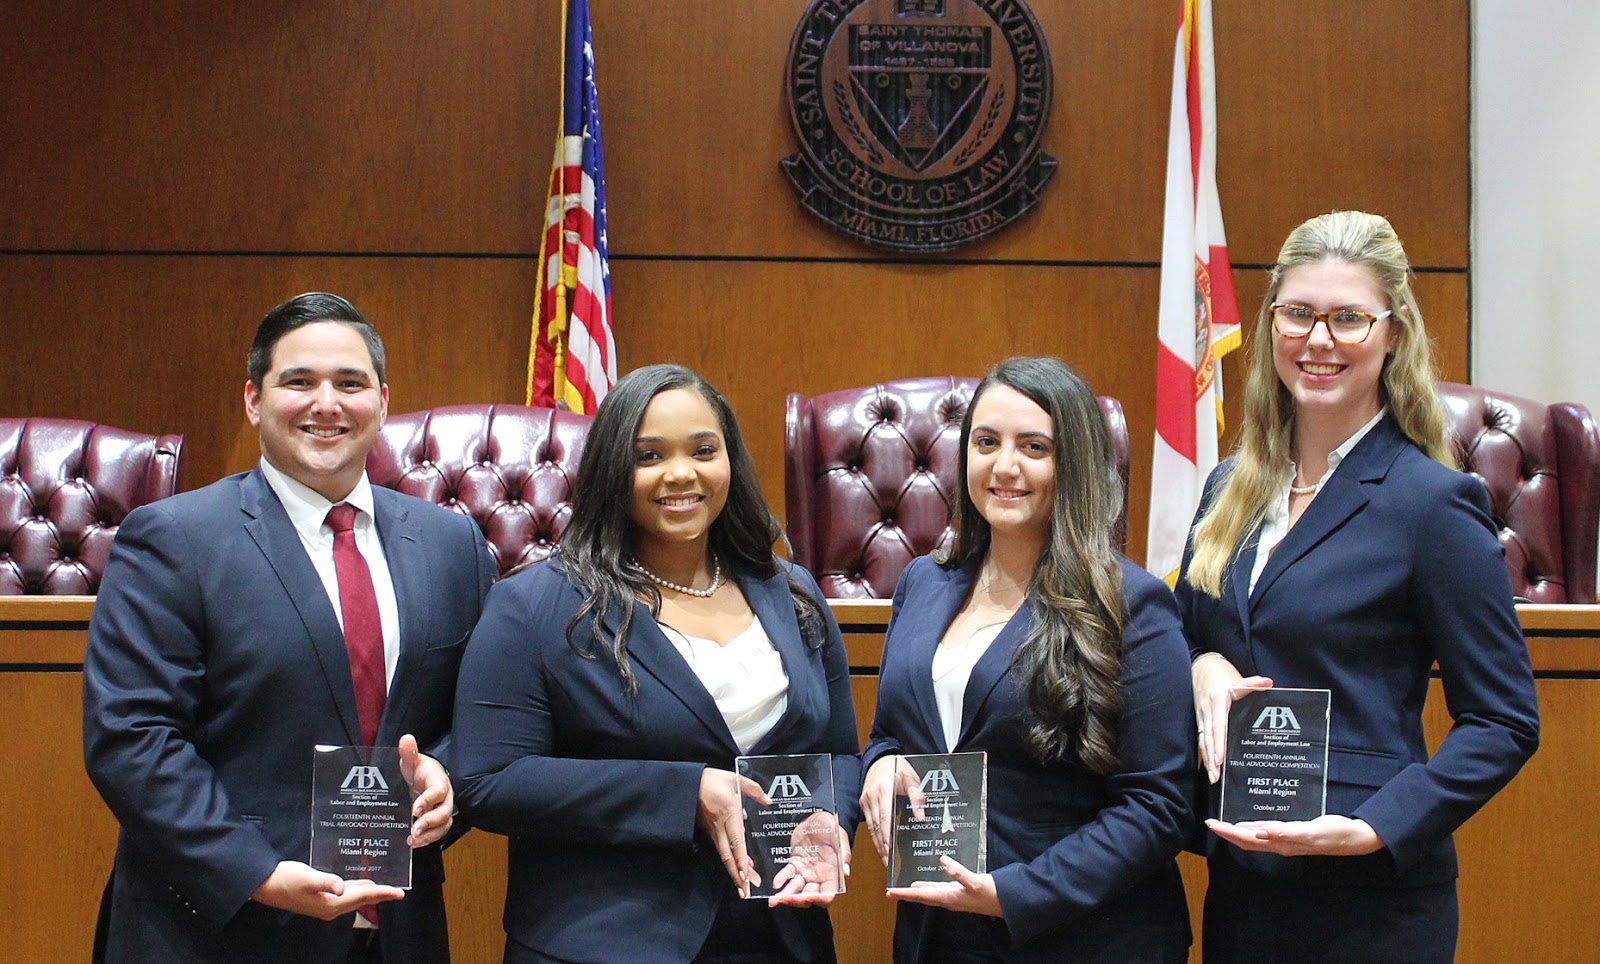 St. Thomas University School of Law: St. Thomas Law Trial Team Wins ABA  Labor and Employment Law Regional Mock Trial Competition